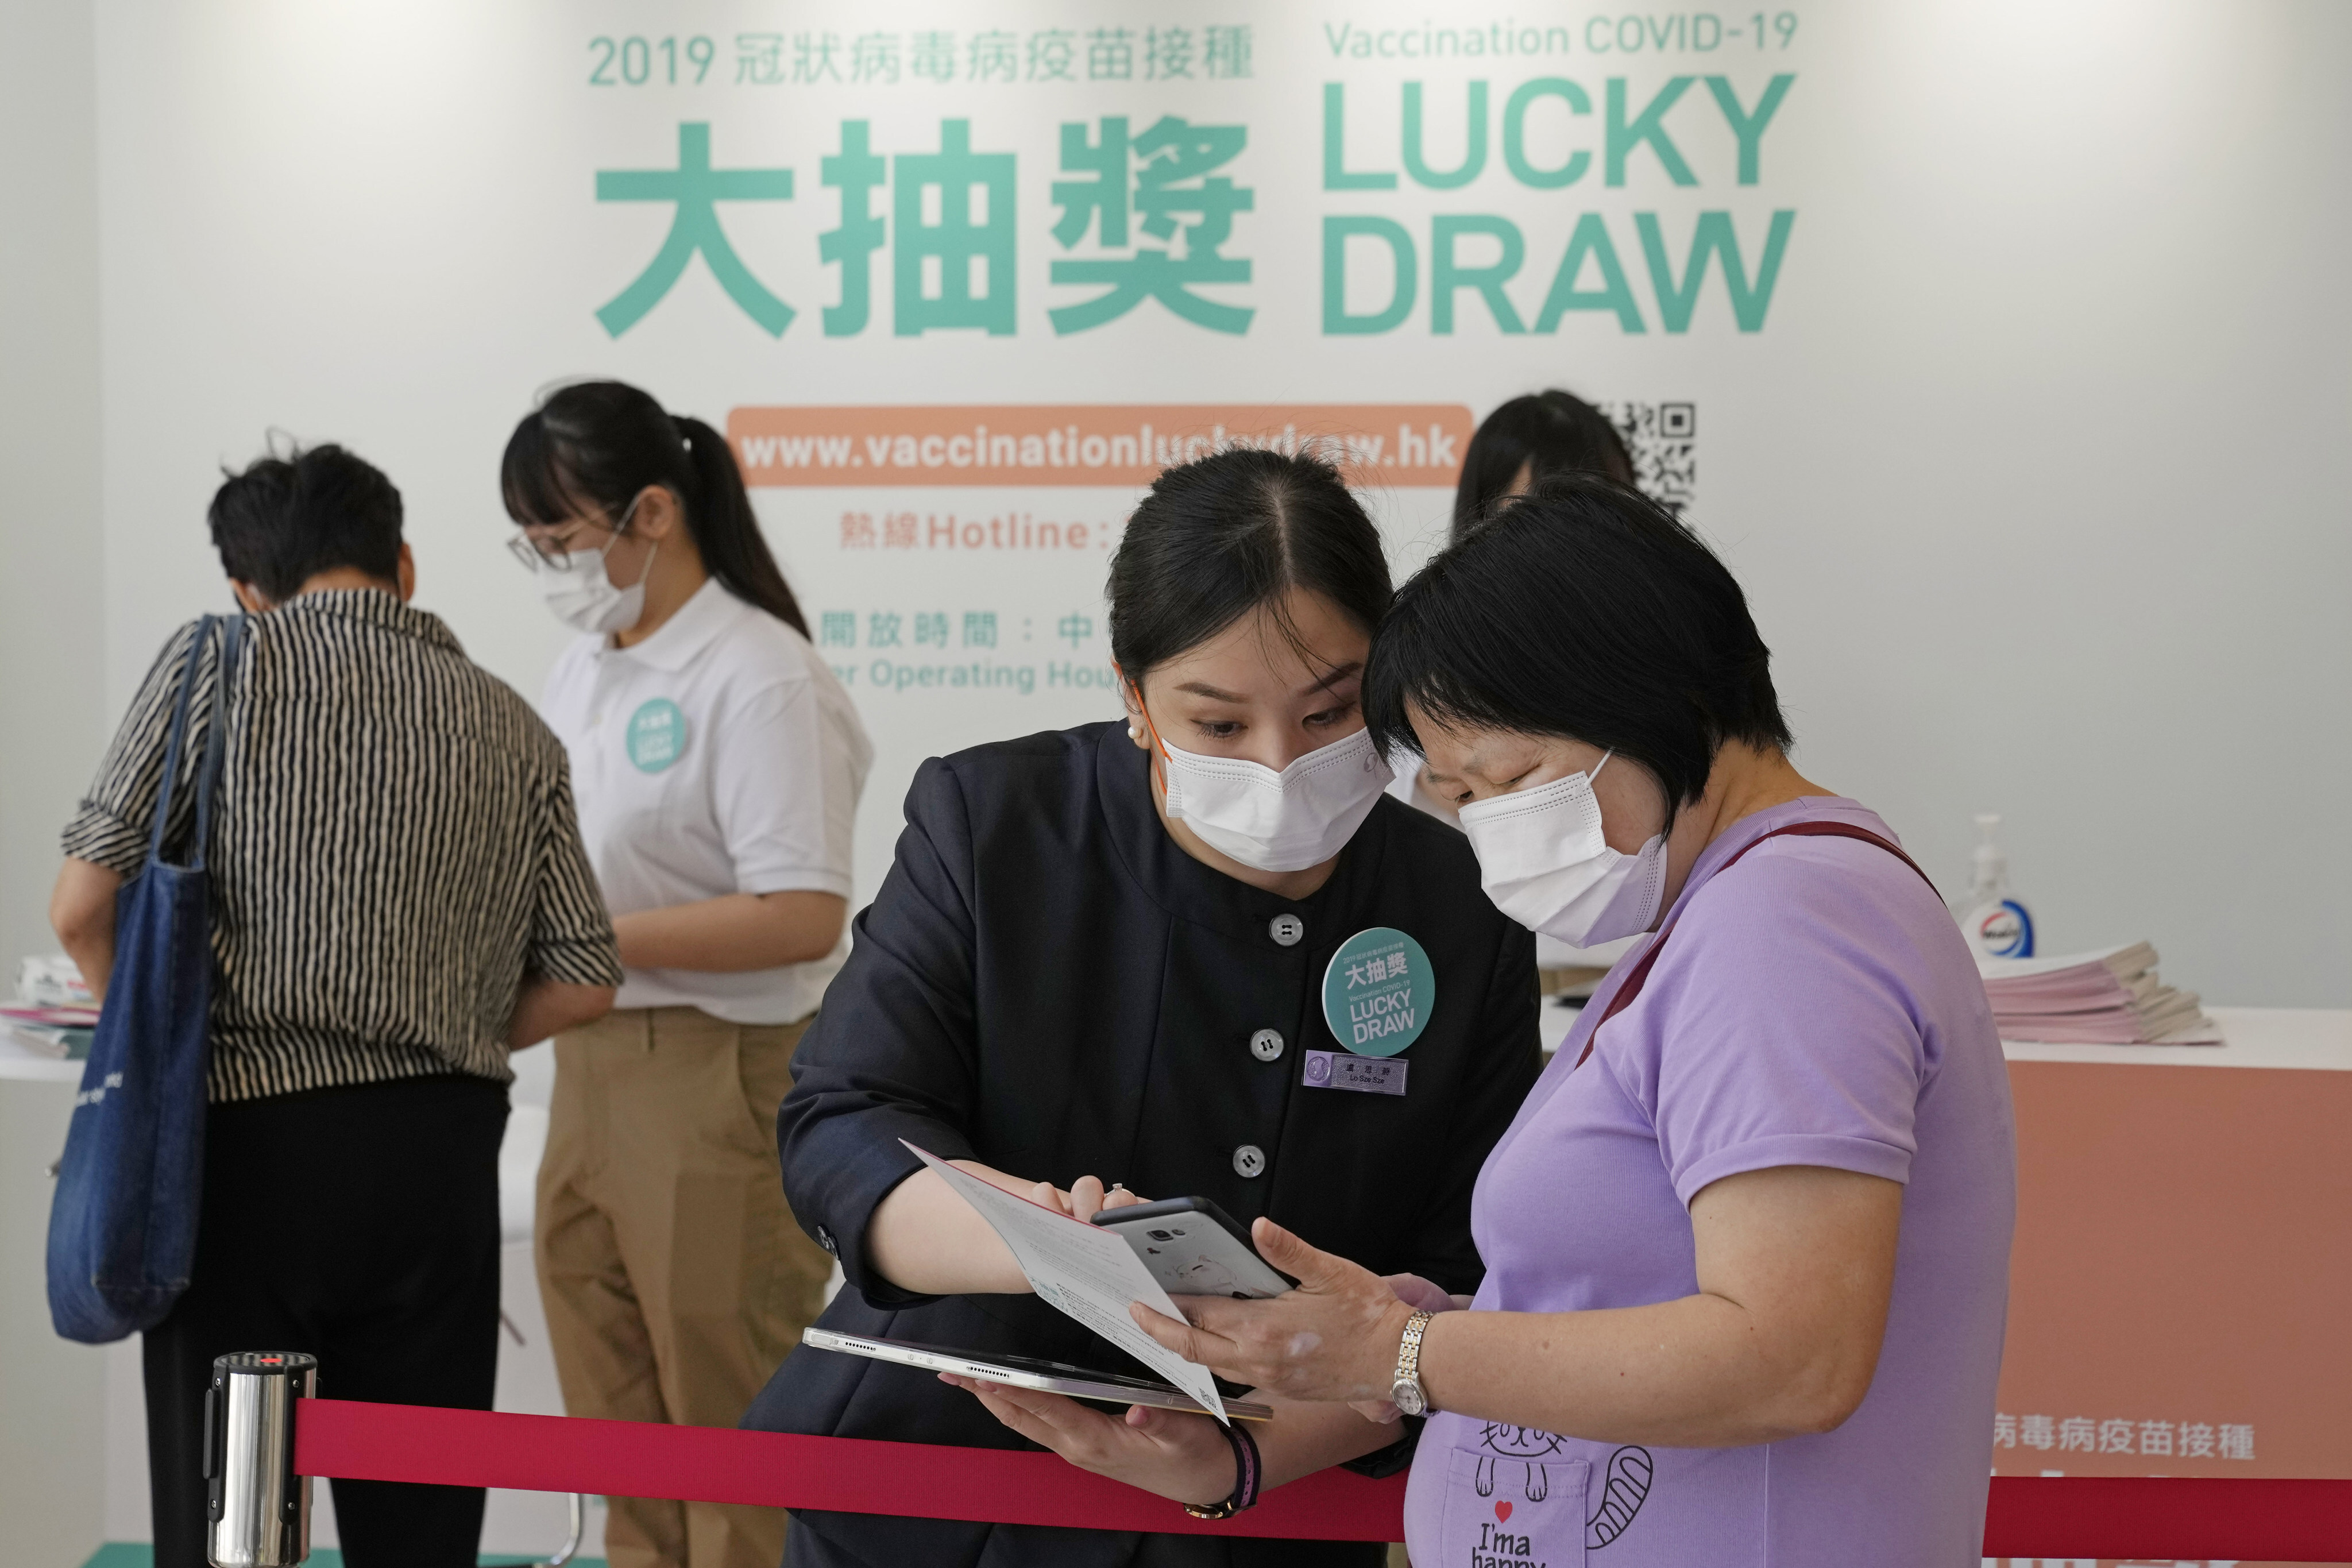 People register for the chance to win a HK$10.8 million in the Grand Central residential building complex in Kwun Tong, Hong Kong, one of many prizes being offered as a prize for being vaccinated. Photo: AP